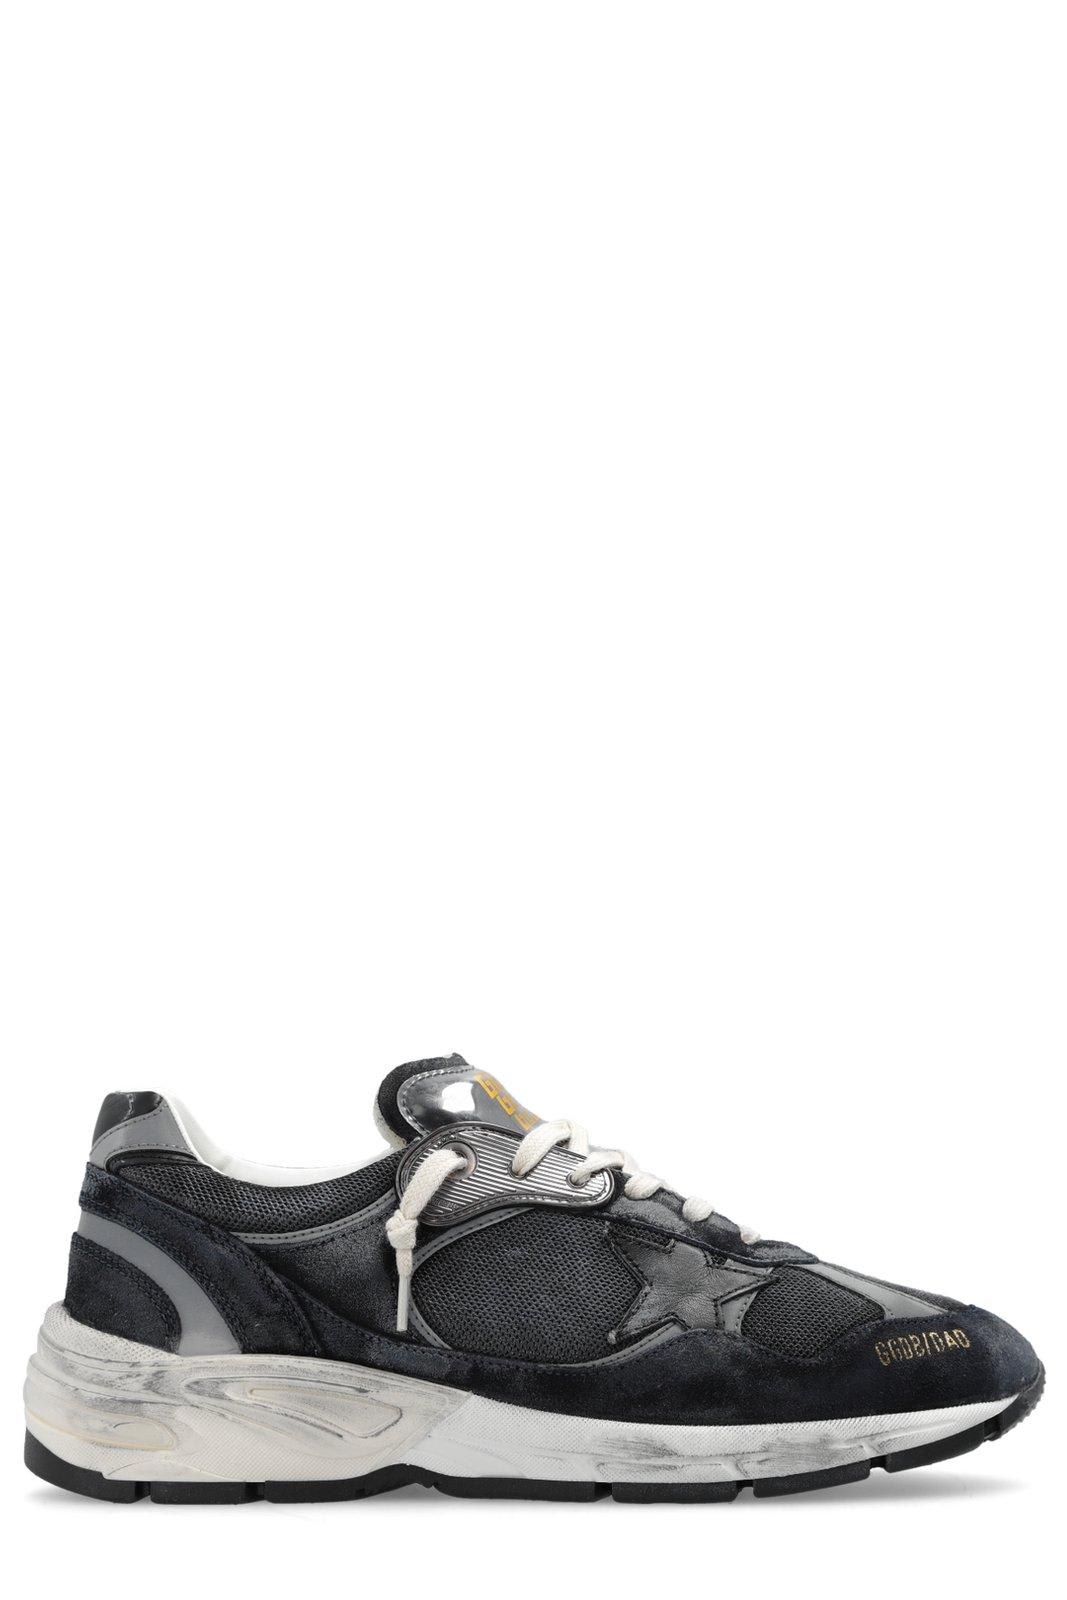 Golden Goose Star-patch Lace-up Sneakers In Dark Blue/silver/black